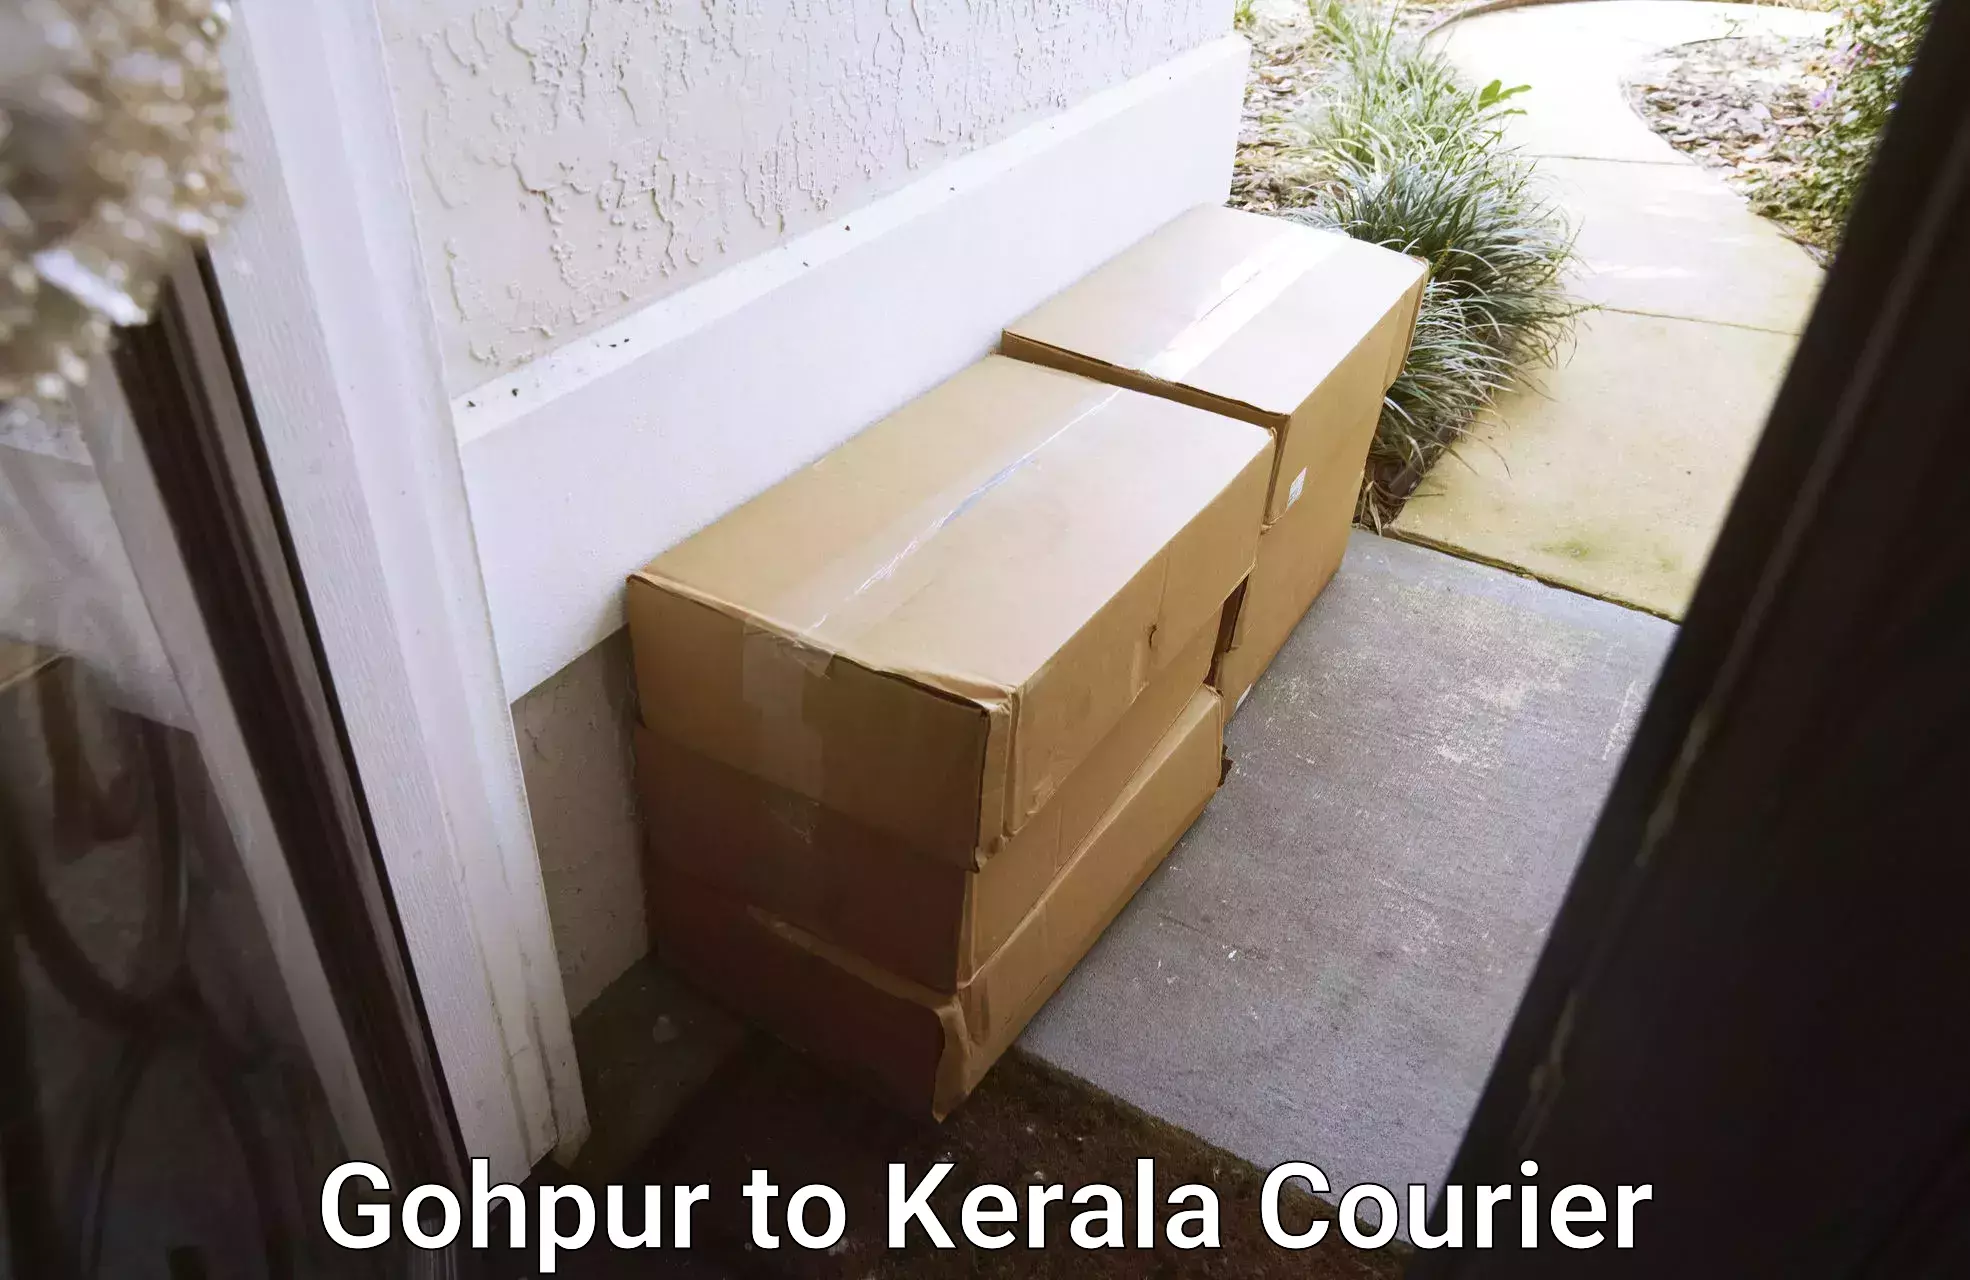 24/7 courier service Gohpur to Angamaly